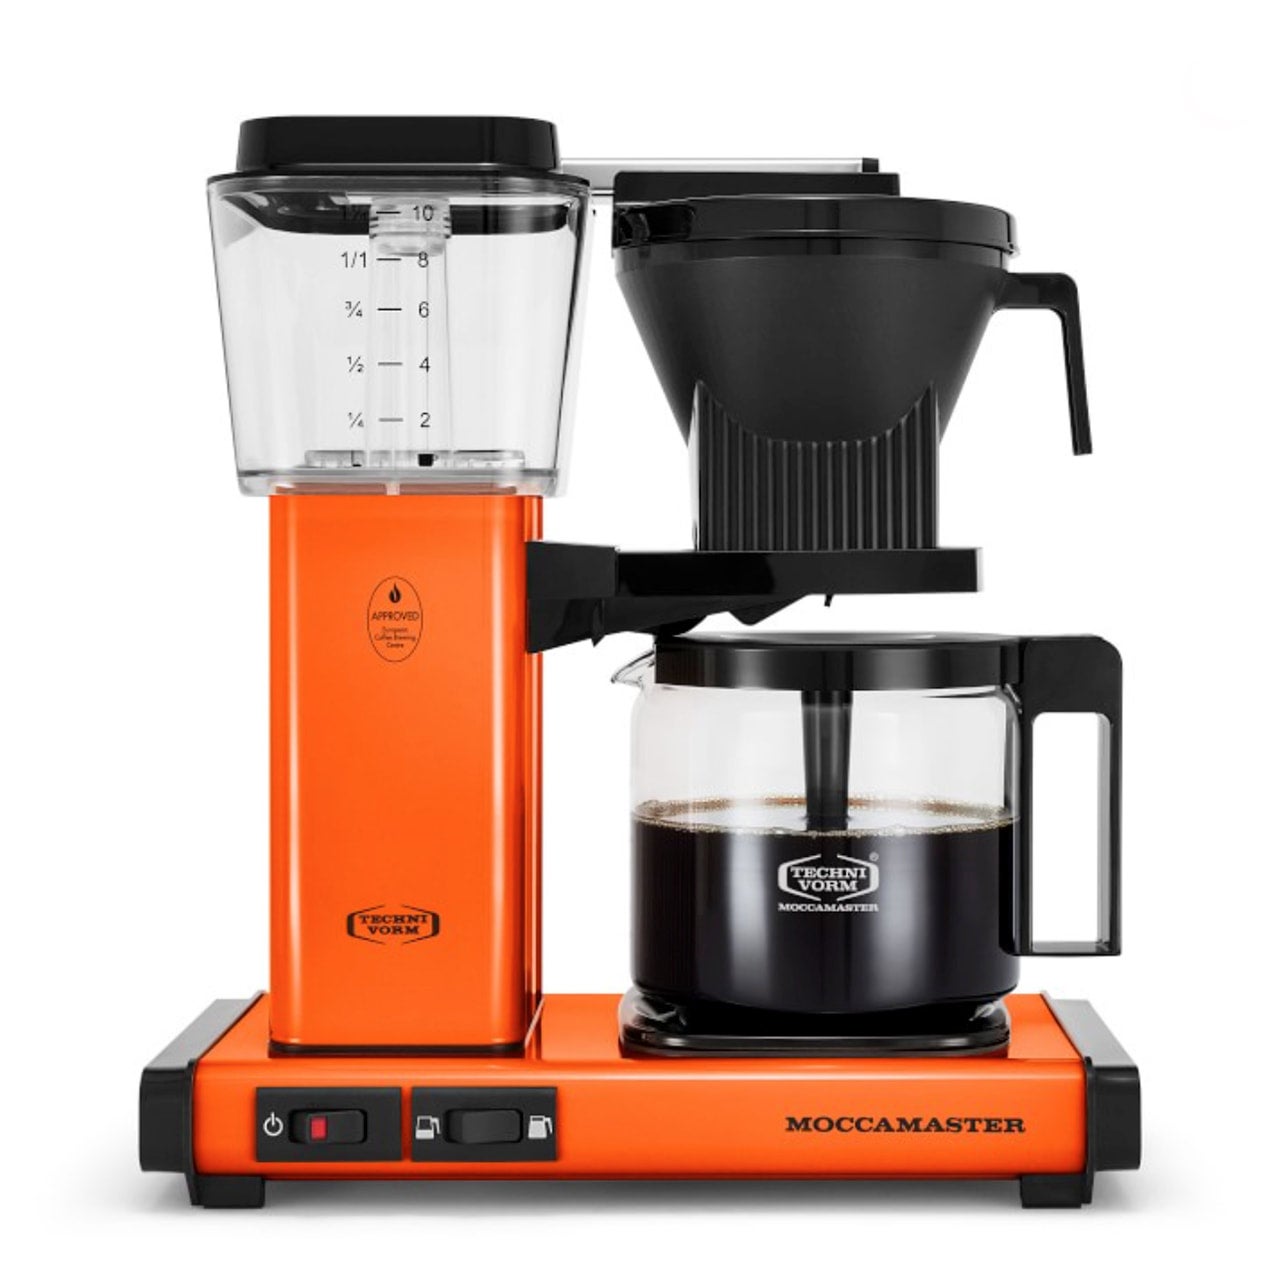 Moccamaster by Technivorm KBGV Select 10-Cup Coffee Maker Orange